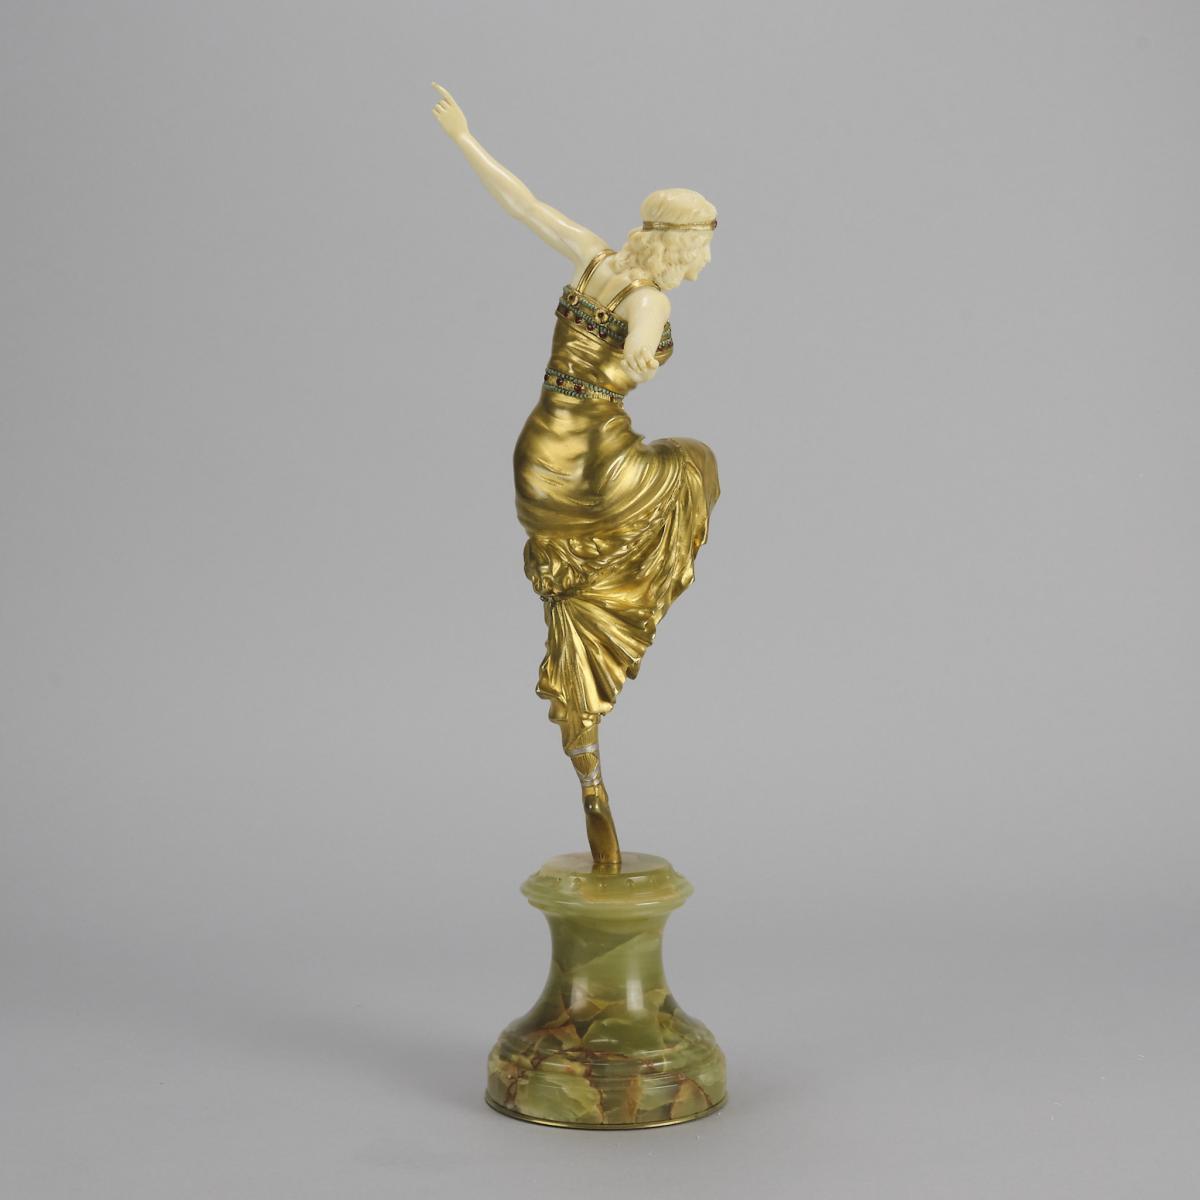 Early 20th Century Chryselephantine Sculpture entitled "Russian Dancer" by Paul Philippe